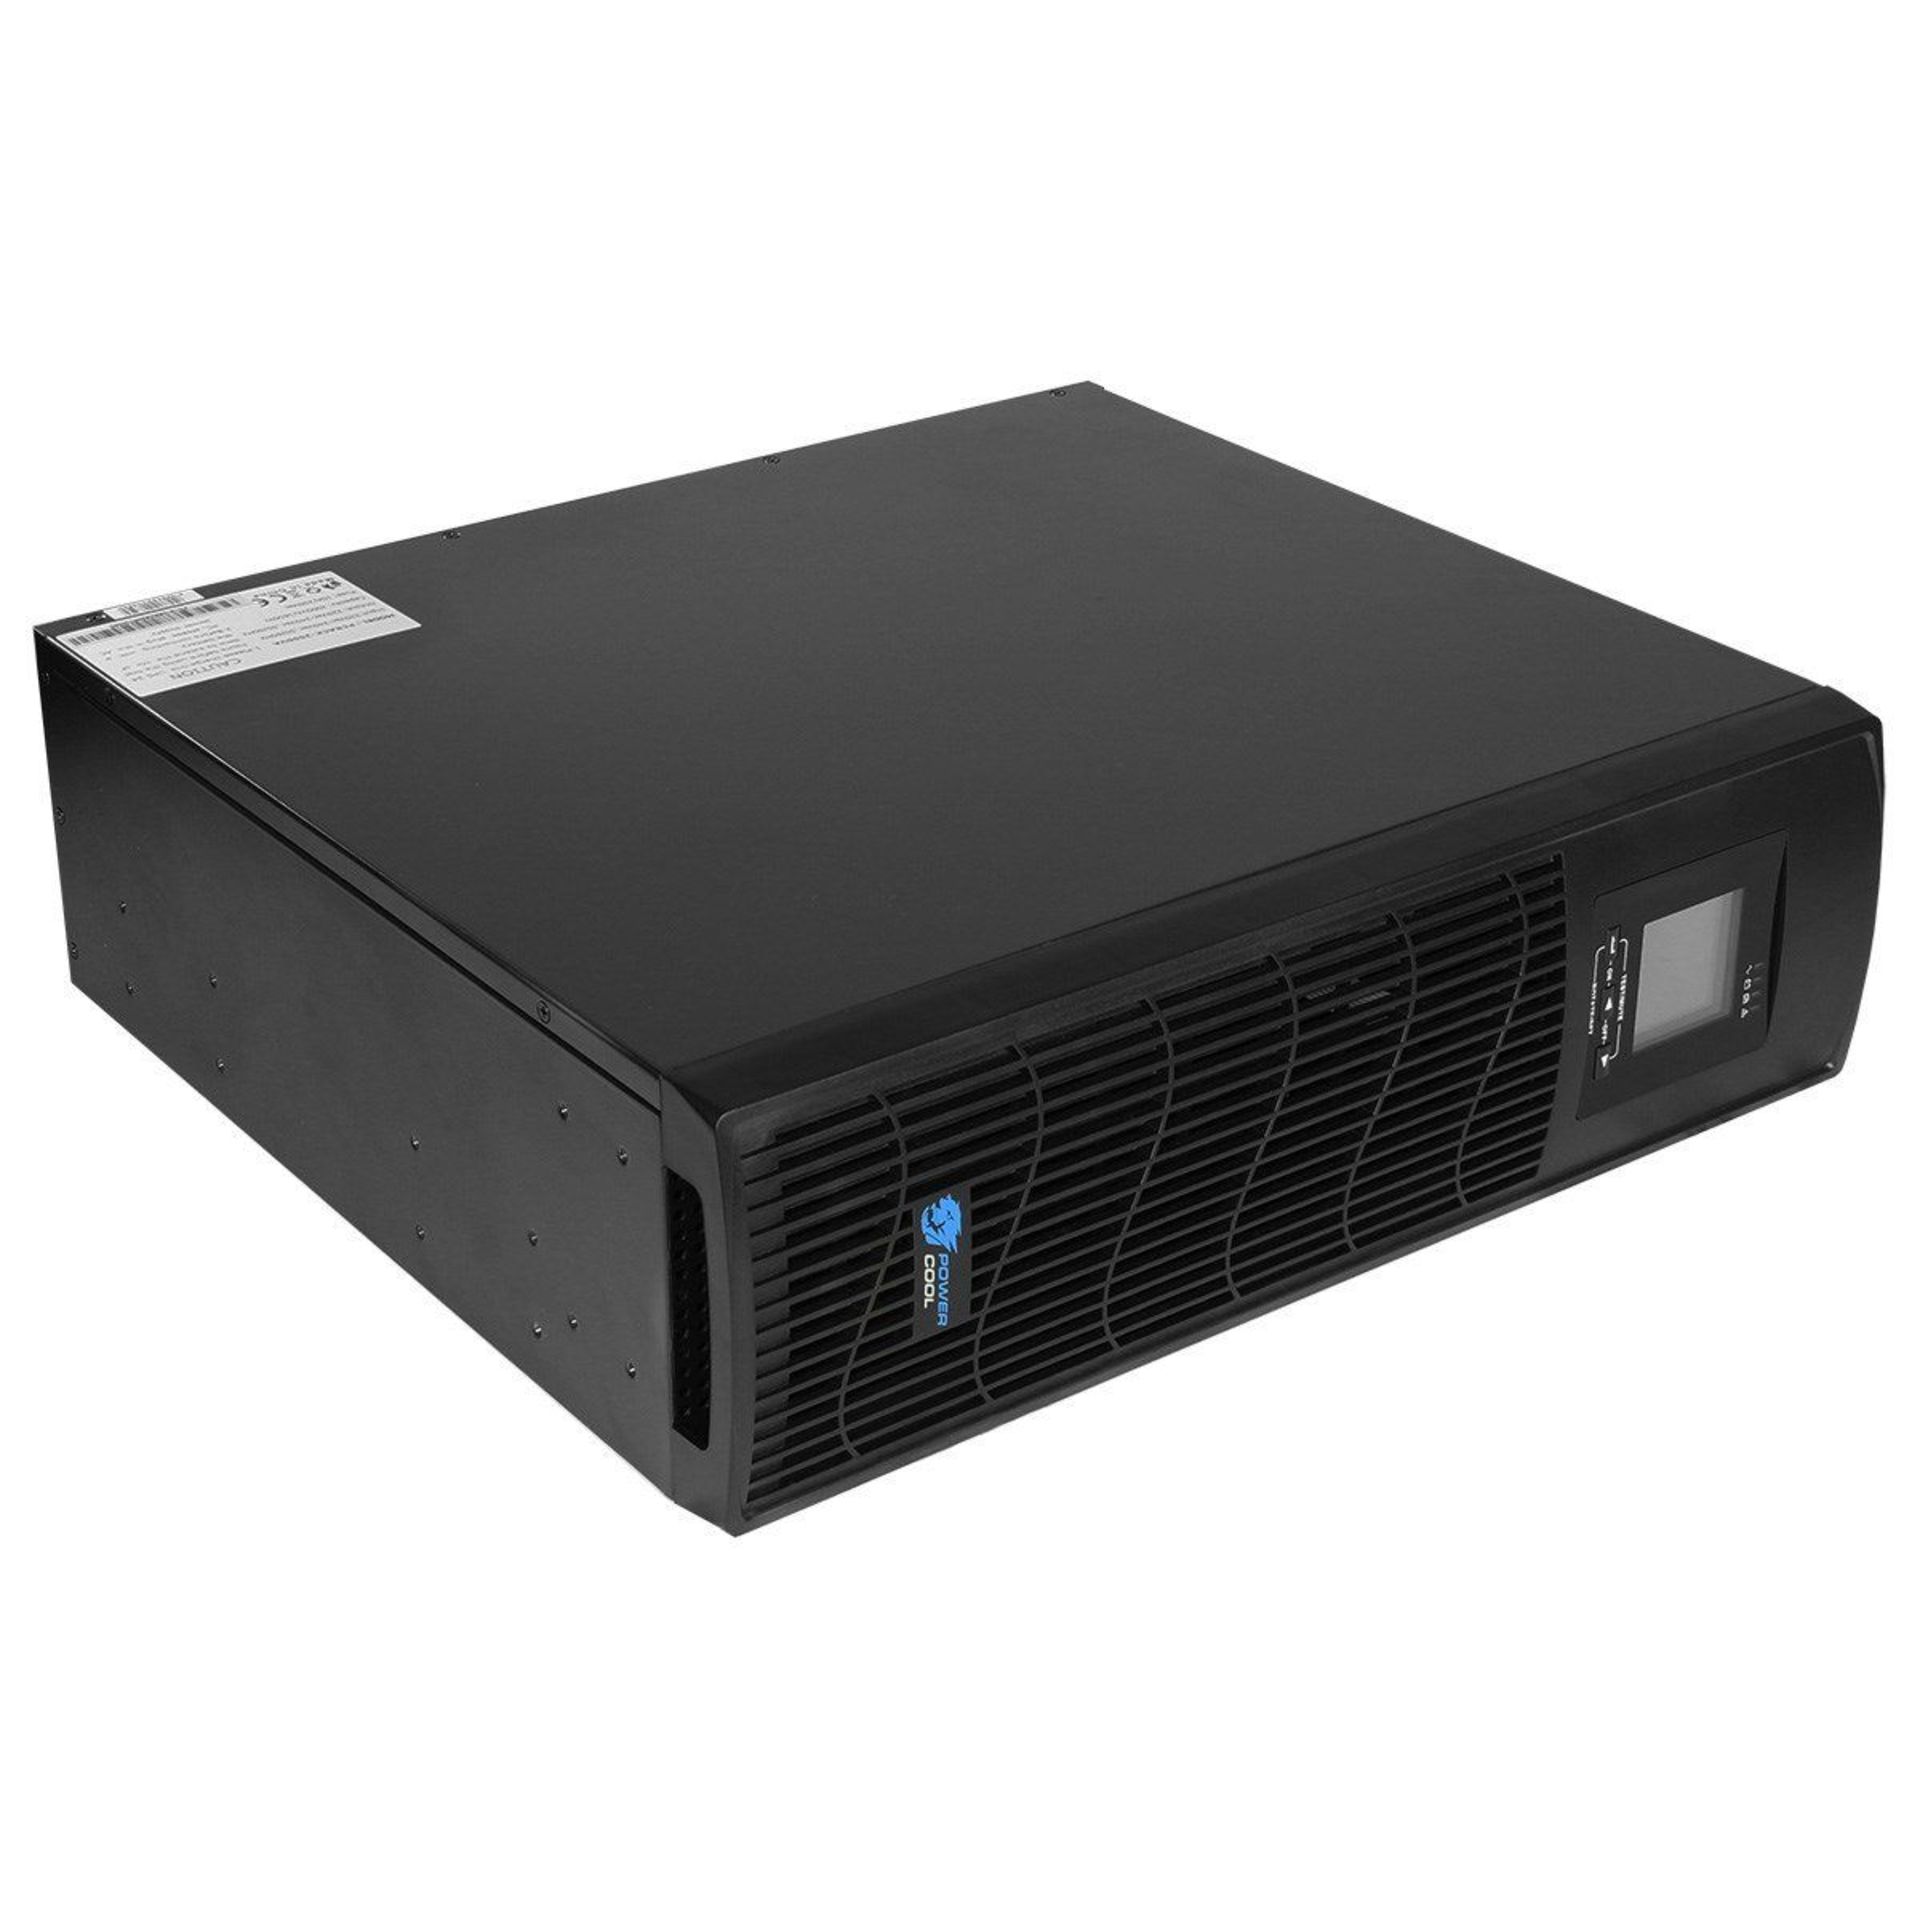 Powercool Rack-Mount Off-Line 2000VA UPS with LCD & USB Monitoring. - P2. RRP £435.00. The UPS